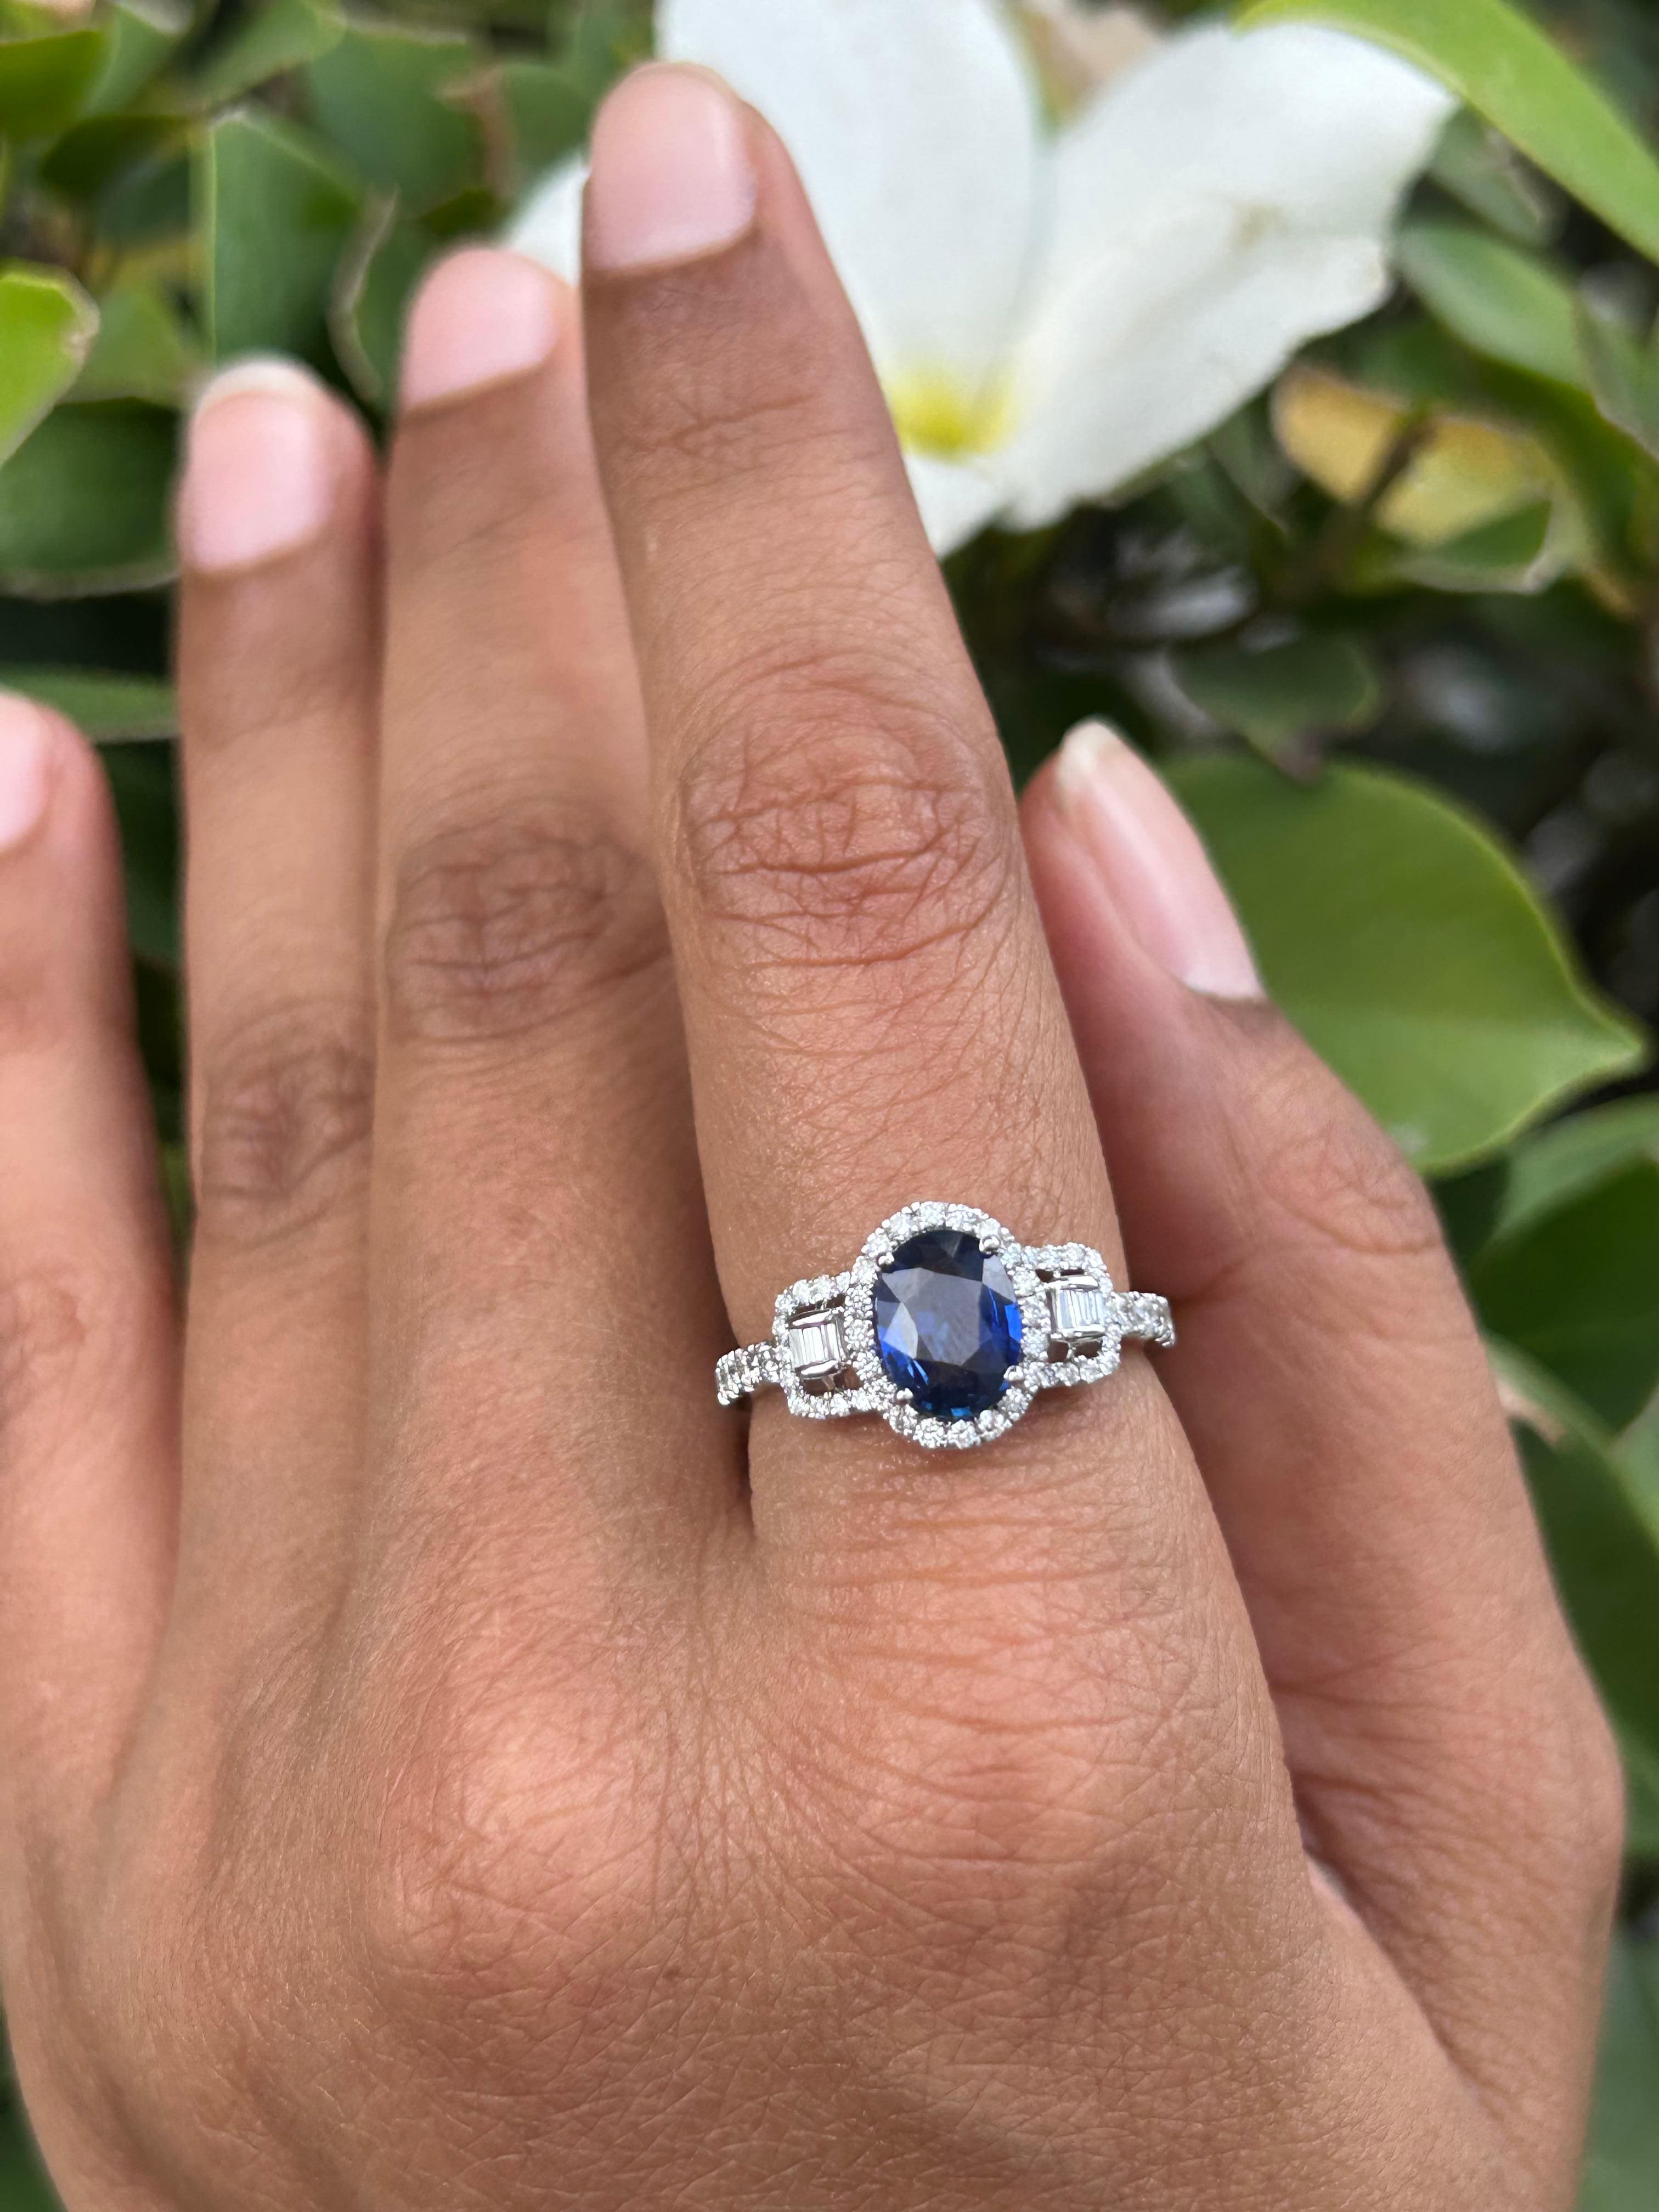 For Sale:  18k Solid White Gold Faceted Blue Sapphire Diamond Engagement Ring Certified 8